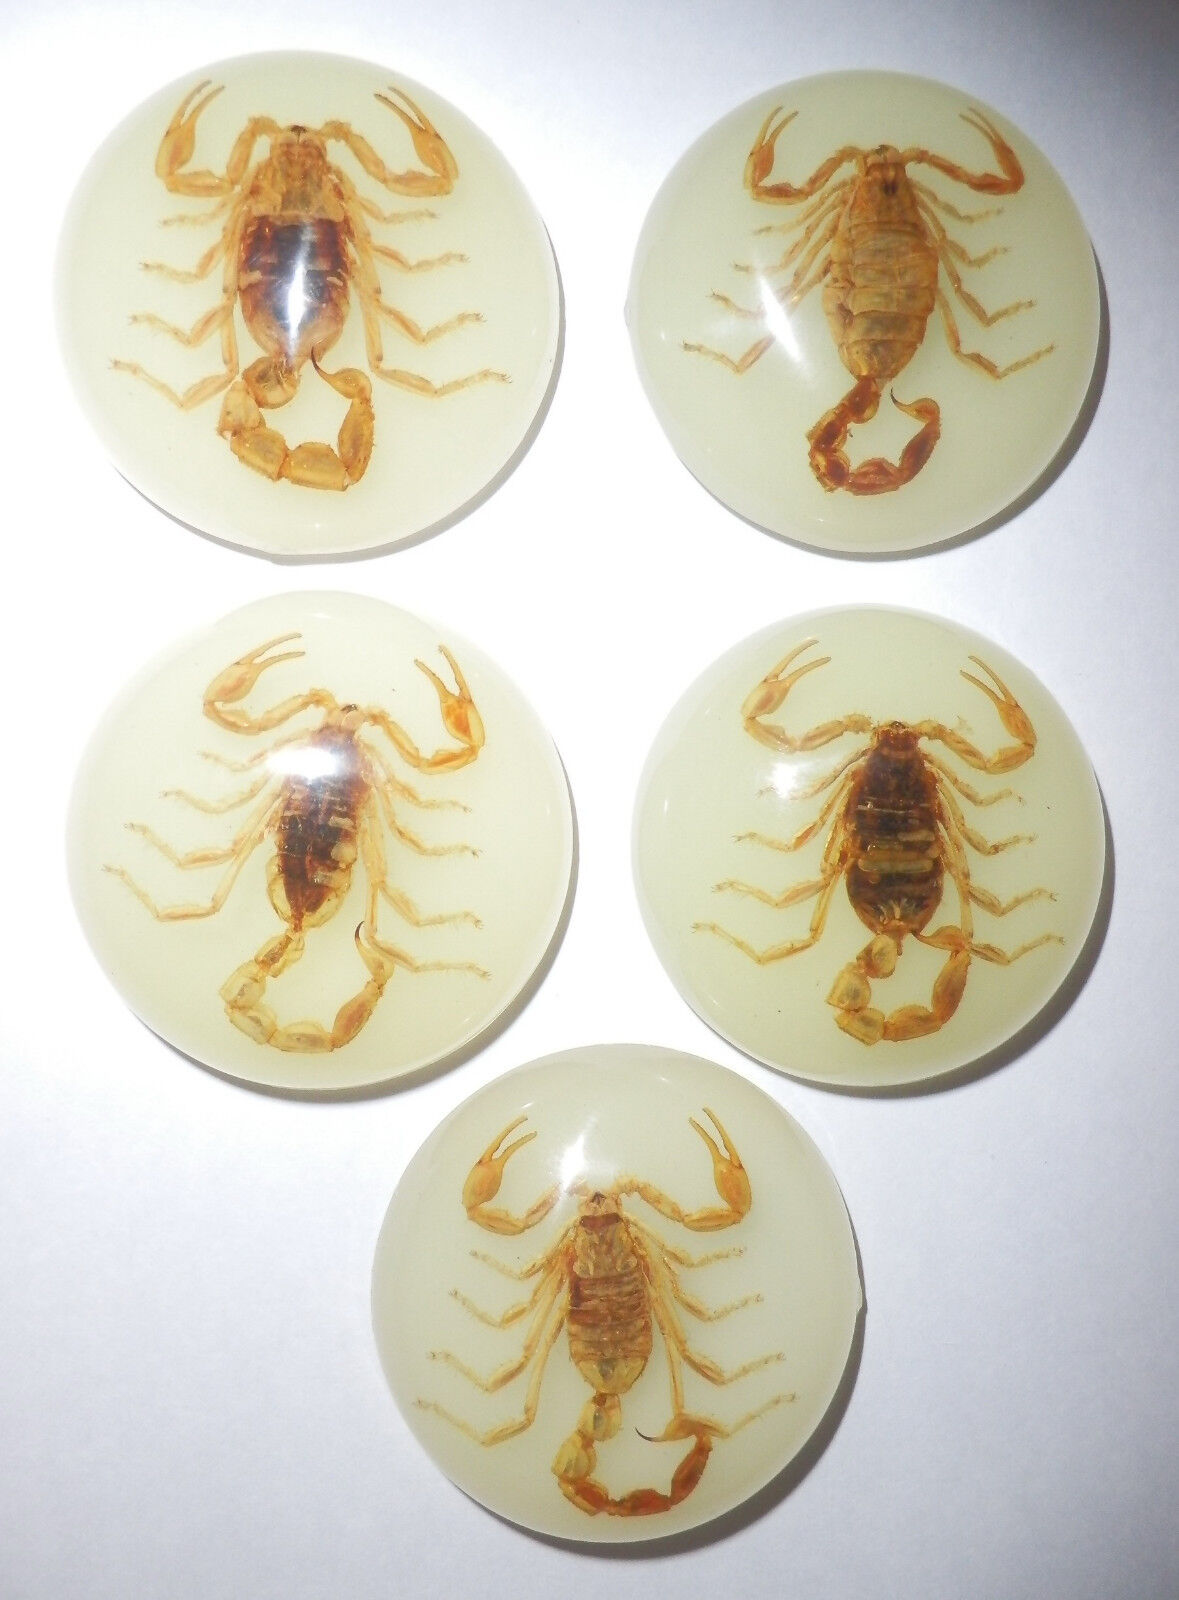 Insect Cabochon Chinese Golden Scorpion 35 mm Round Glow 10 pieces Lot